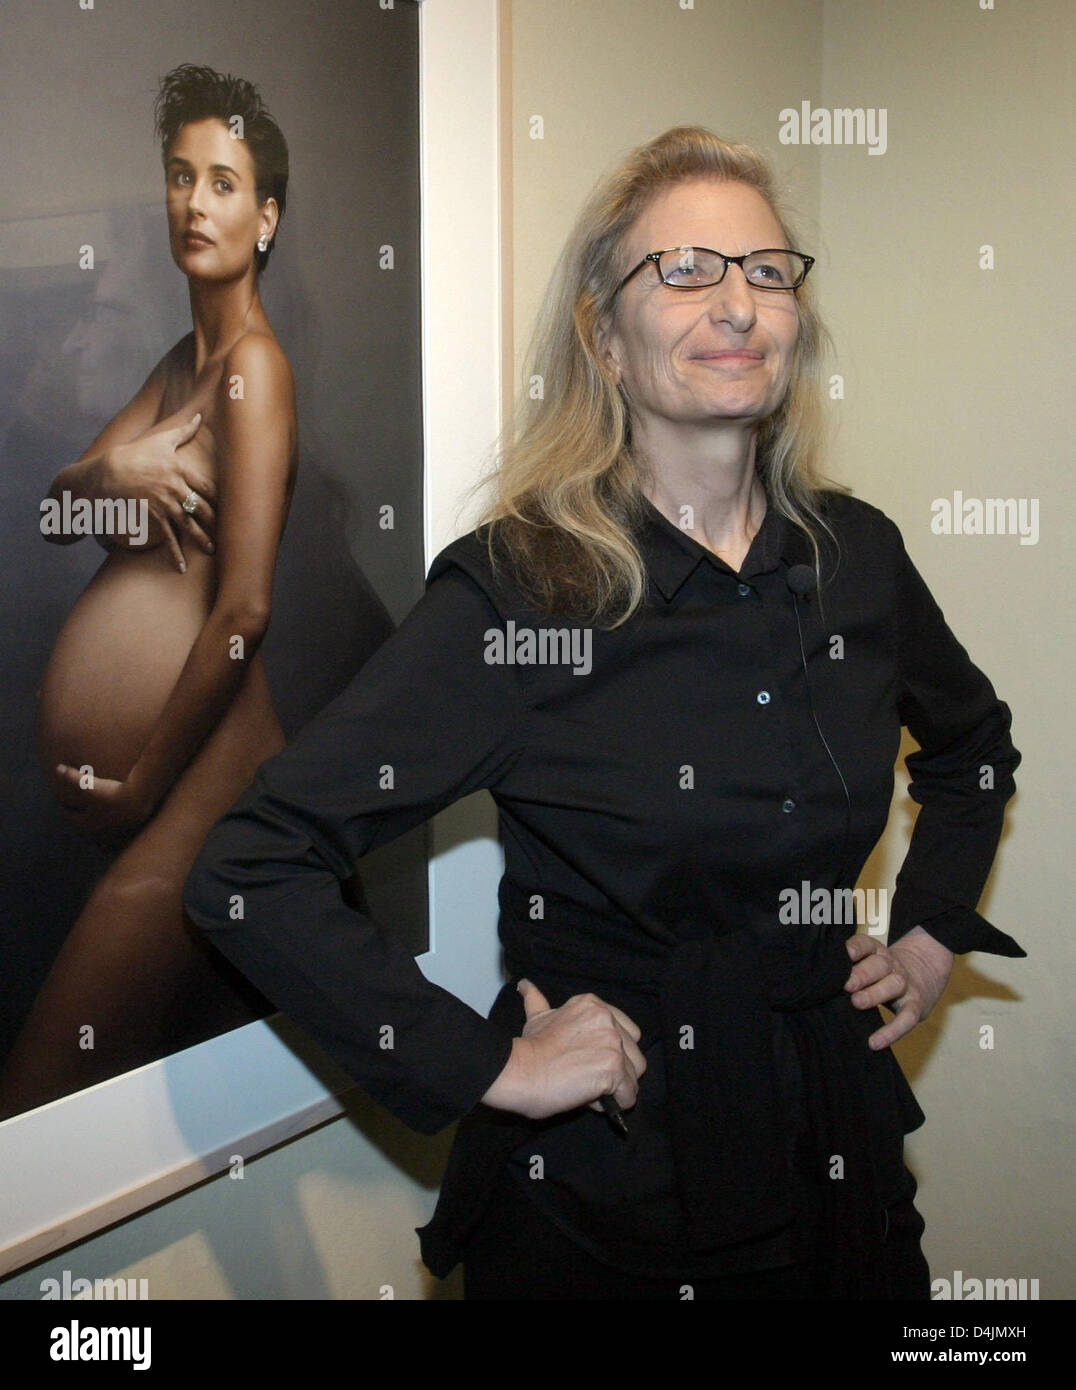 US photographer Annie Leibovitz stands next to one of her photos of pregnant US actress Demi Moore on display in Berlin, Germany, 20 February 2009. Her photographies are on display in the exhibition ?A Photographer?s Life 1990-2005? at C/O gallery until 24 May. Photo: XAMAX Stock Photo